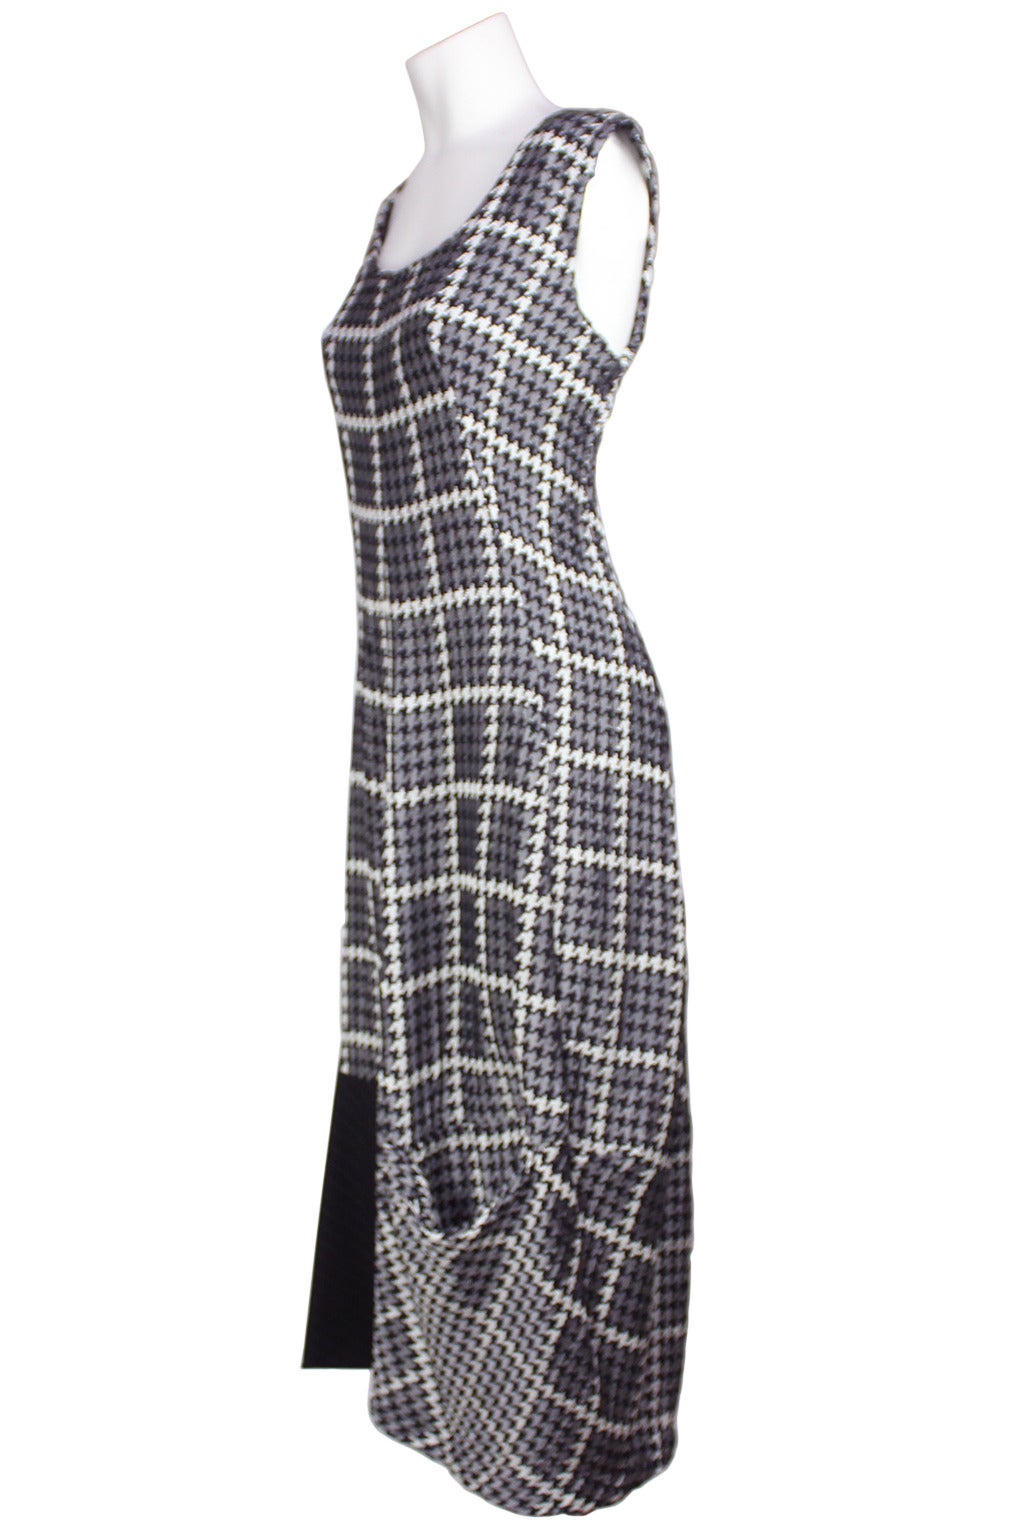 This dress is pure Comme des Garcons with a randomly seamed patchwork hem and pocket details. The dress is a black and white houndstooth print mixed with men's wool pinstripe suiting at the hem. The dress narrows at the bottom forming a cocoon shape.